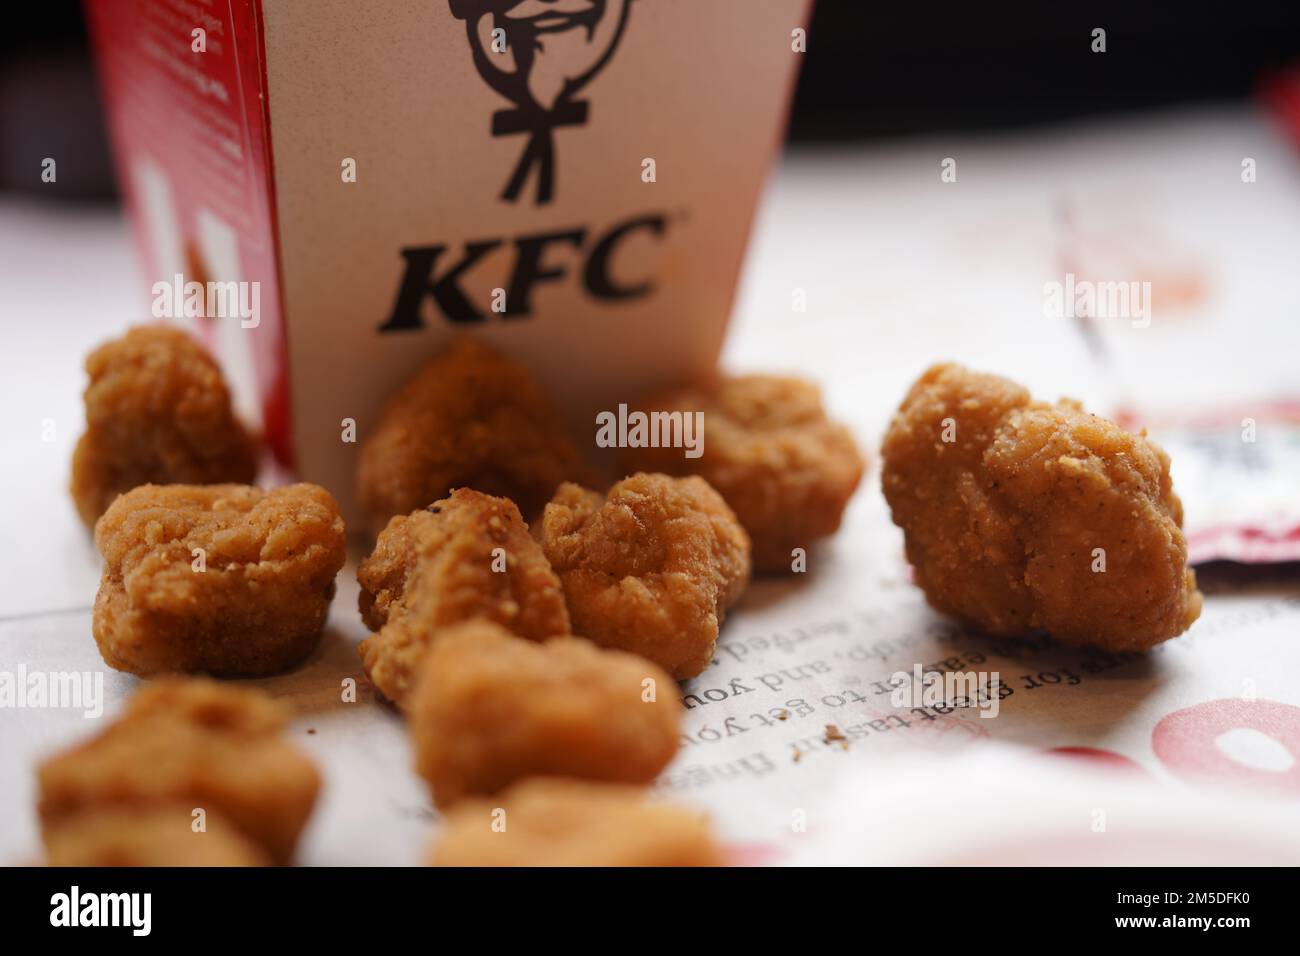 Fried popcorn chicken on the restaurant plate with natural sunlight. KFC restaurant. KFC is a popular fast-food chain known as Kentucky Fried Chicken. Stock Photo